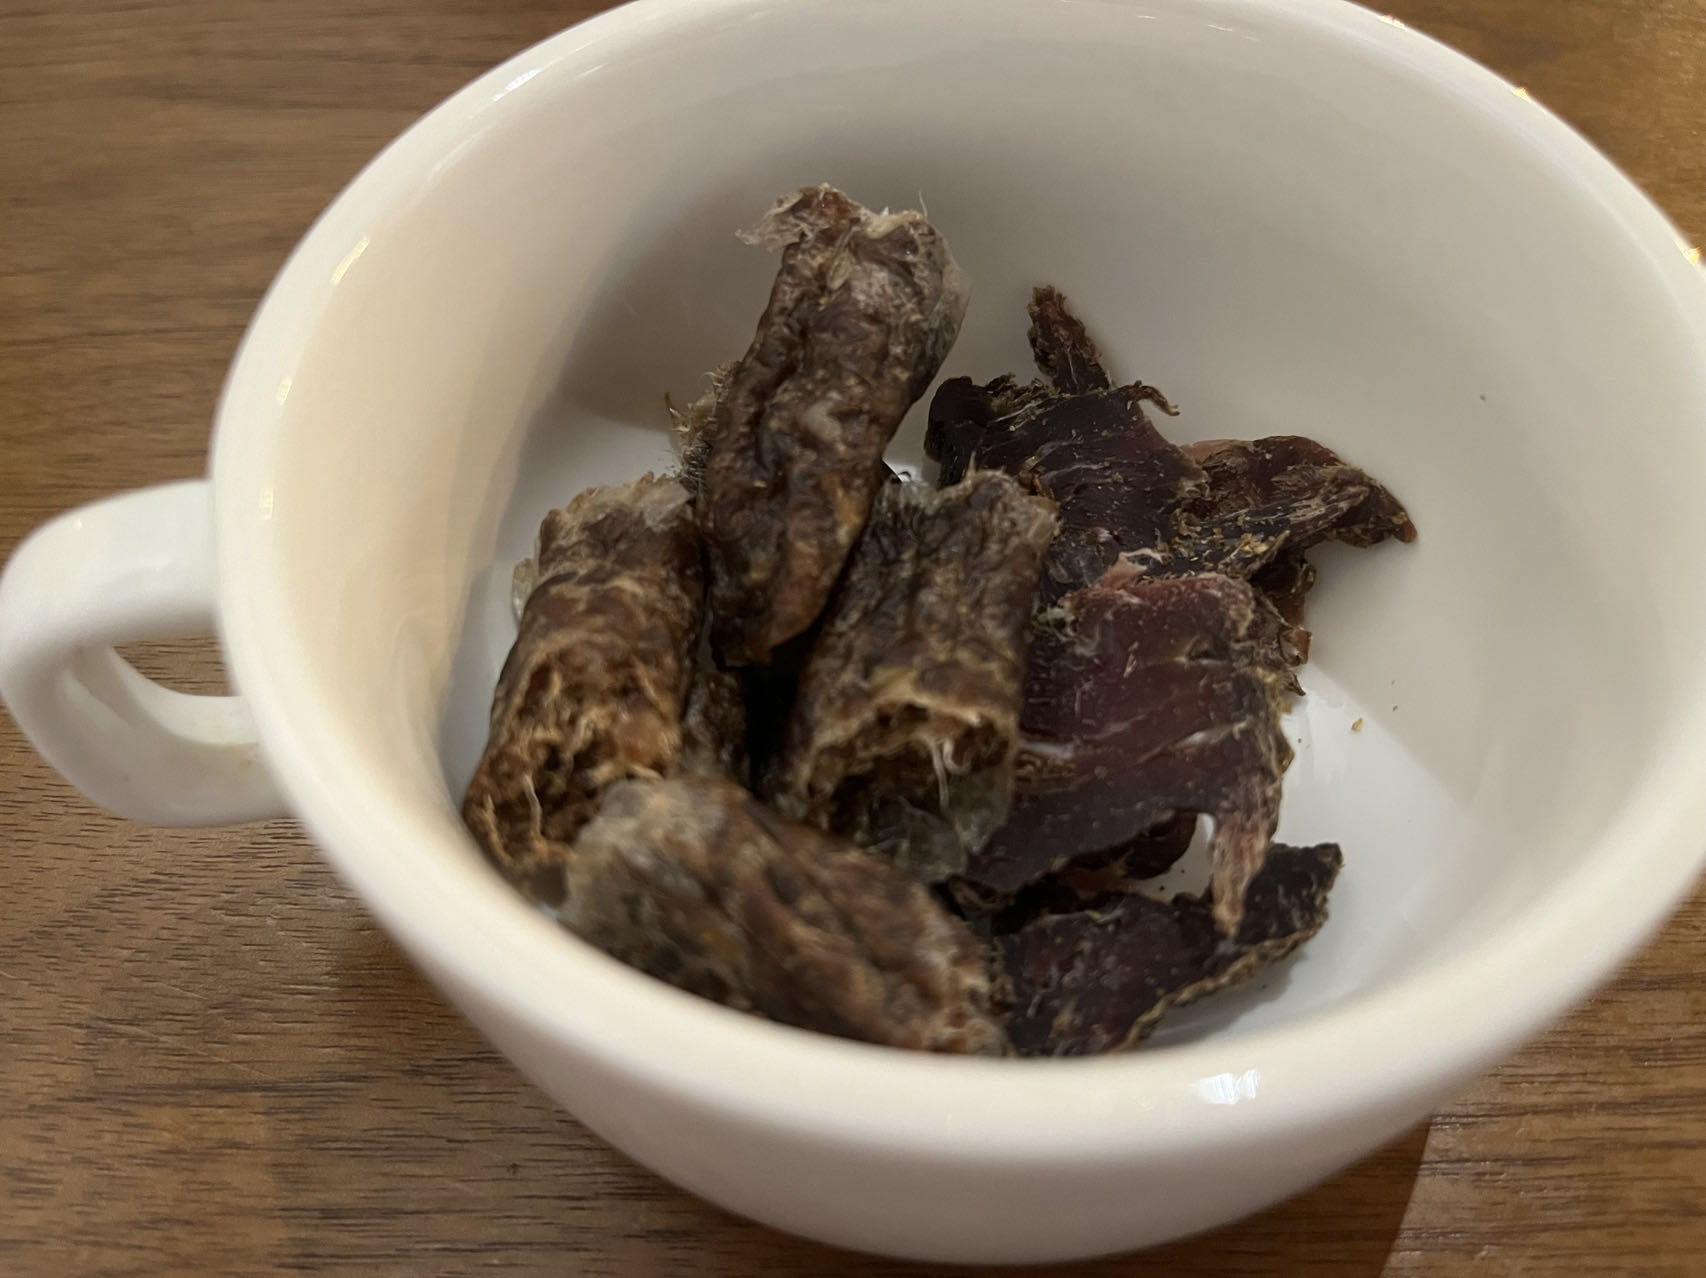 Biltong, a dried meat snack from South Africa /CGTN